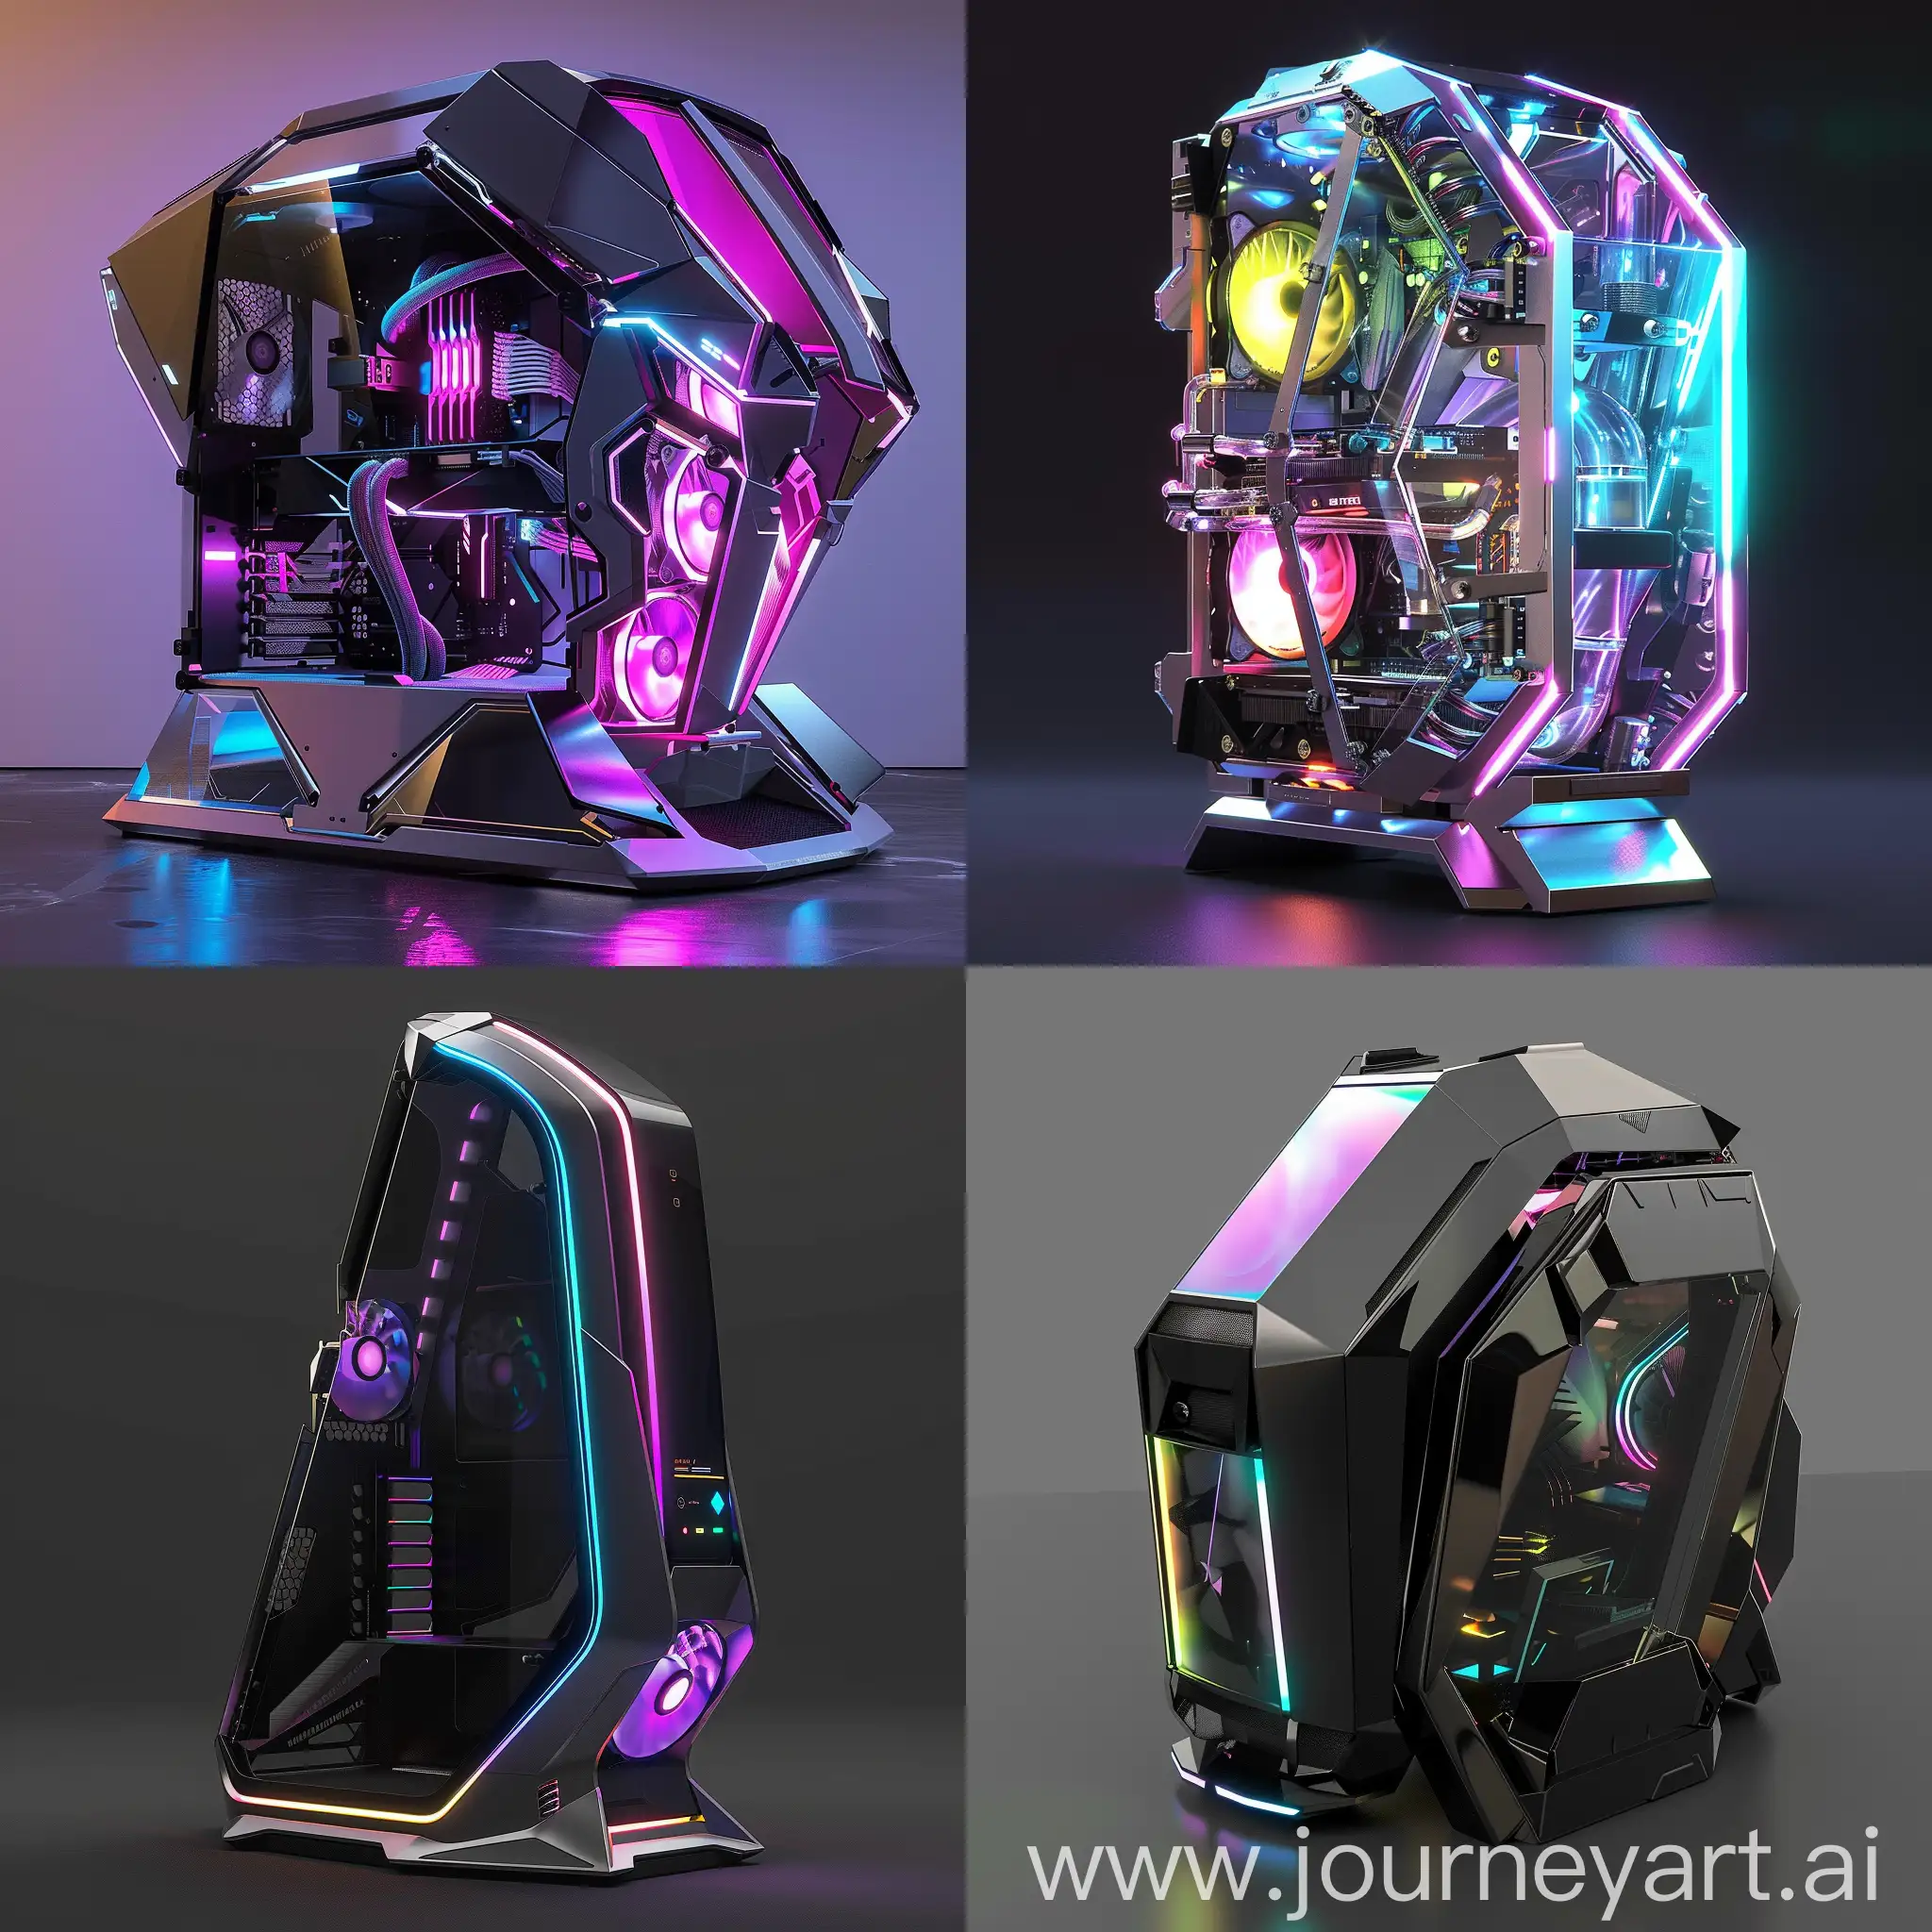 SciFi-PC-Case-with-Integrated-Liquid-Cooling-and-Dynamic-RGB-Lighting